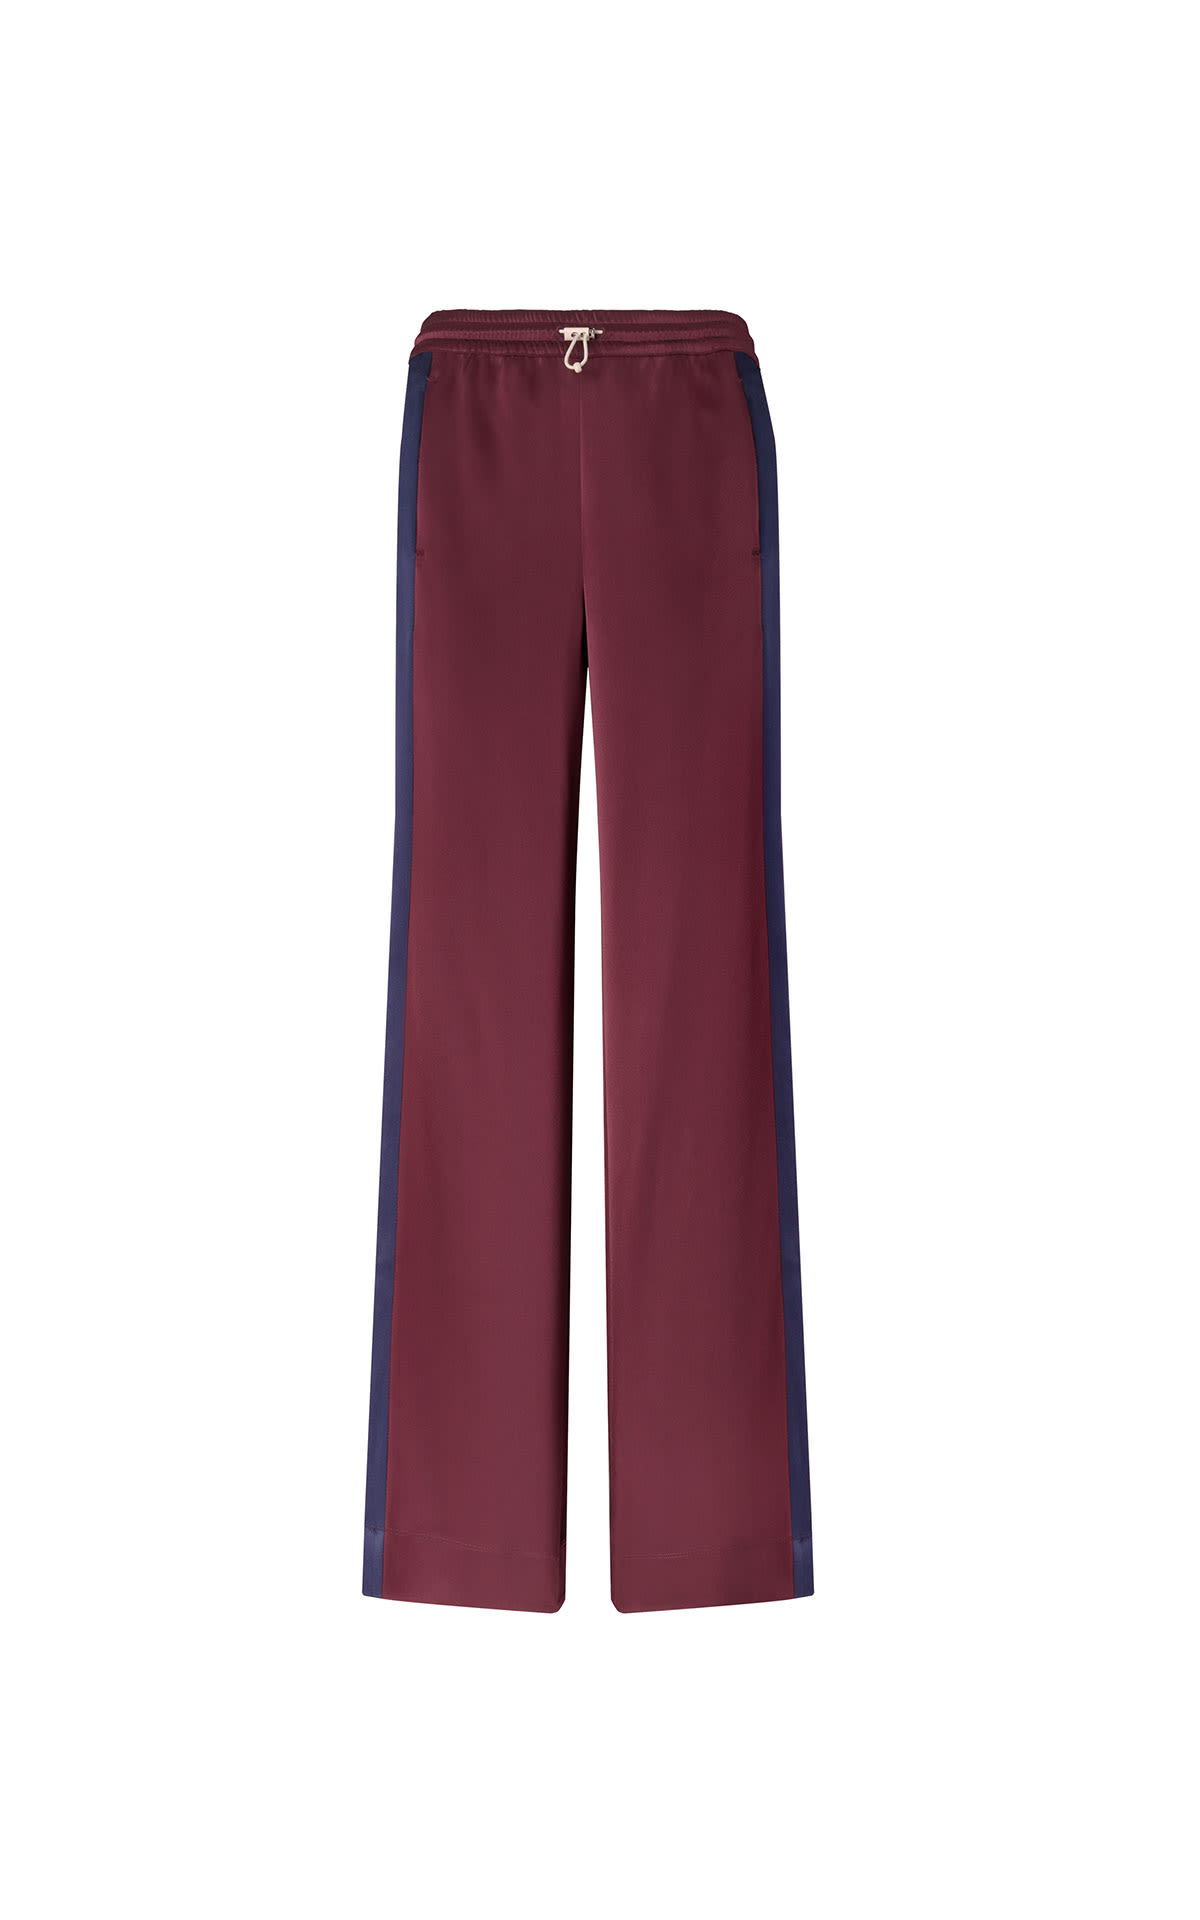 Tory Burch Satin track pants from Bicester Village